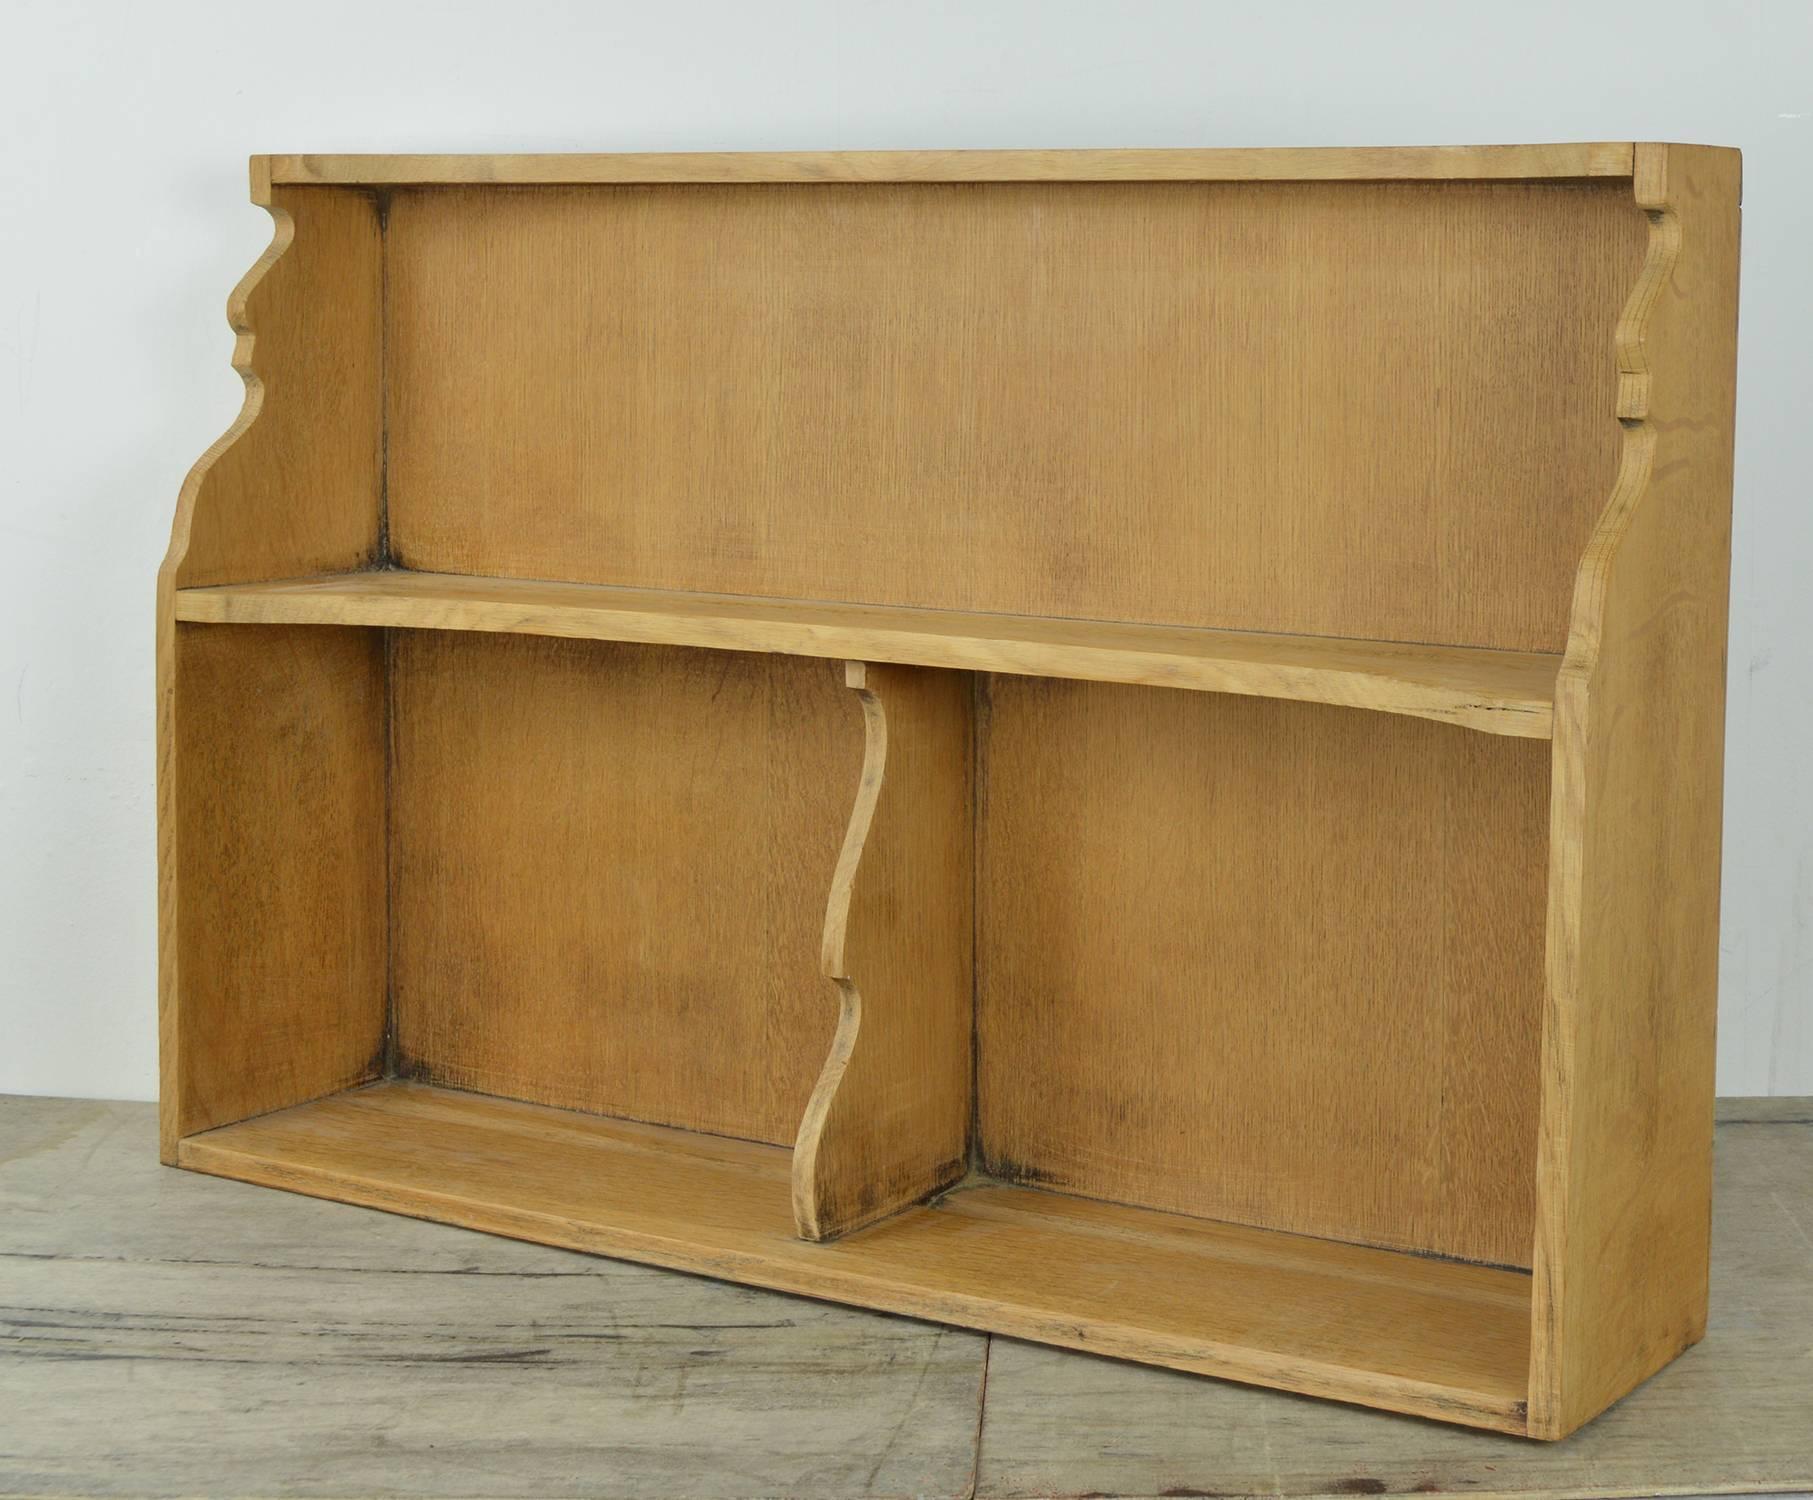 Bleached Vintage Oak Wall Cabinet, English, Midcentury